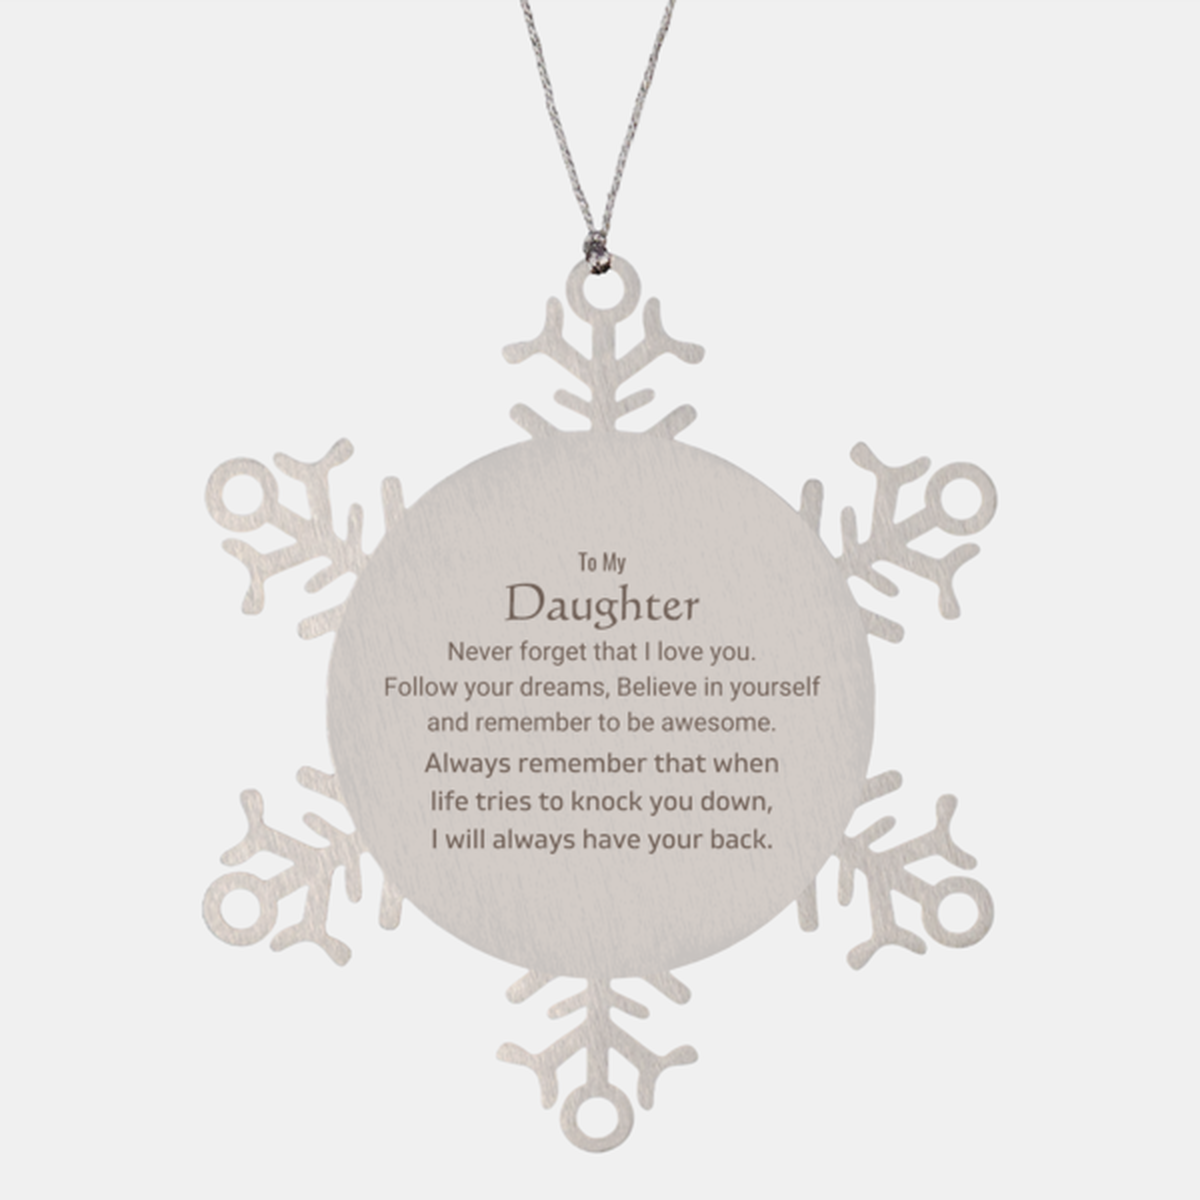 Inspirational Gifts for Daughter, Follow your dreams, Believe in yourself, Daughter Snowflake Ornament, Birthday Christmas Unique Gifts For Daughter